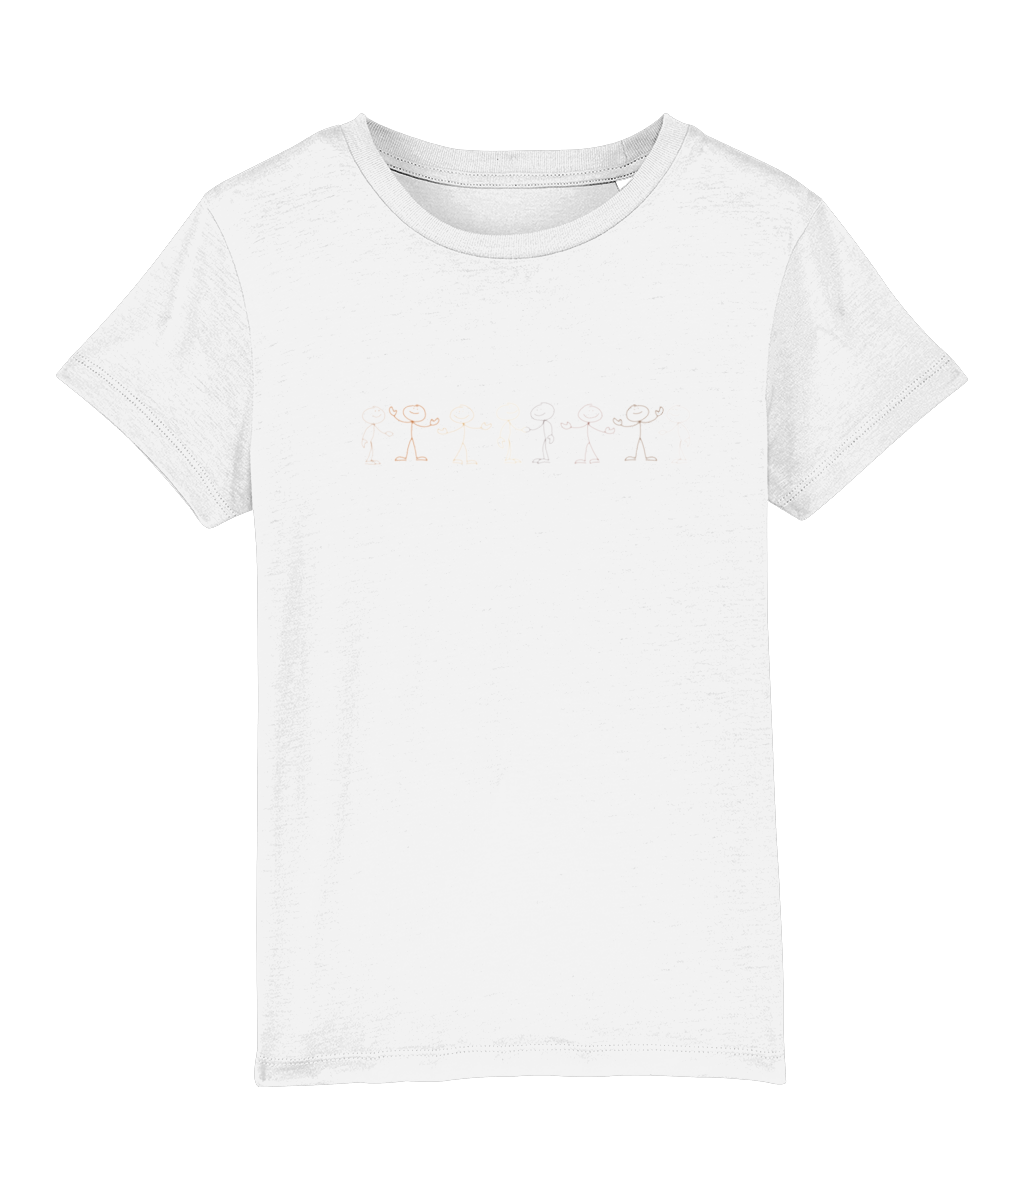 Be Friends Boys Organic Cotton T Shirt - Buy any 3 get 10% off